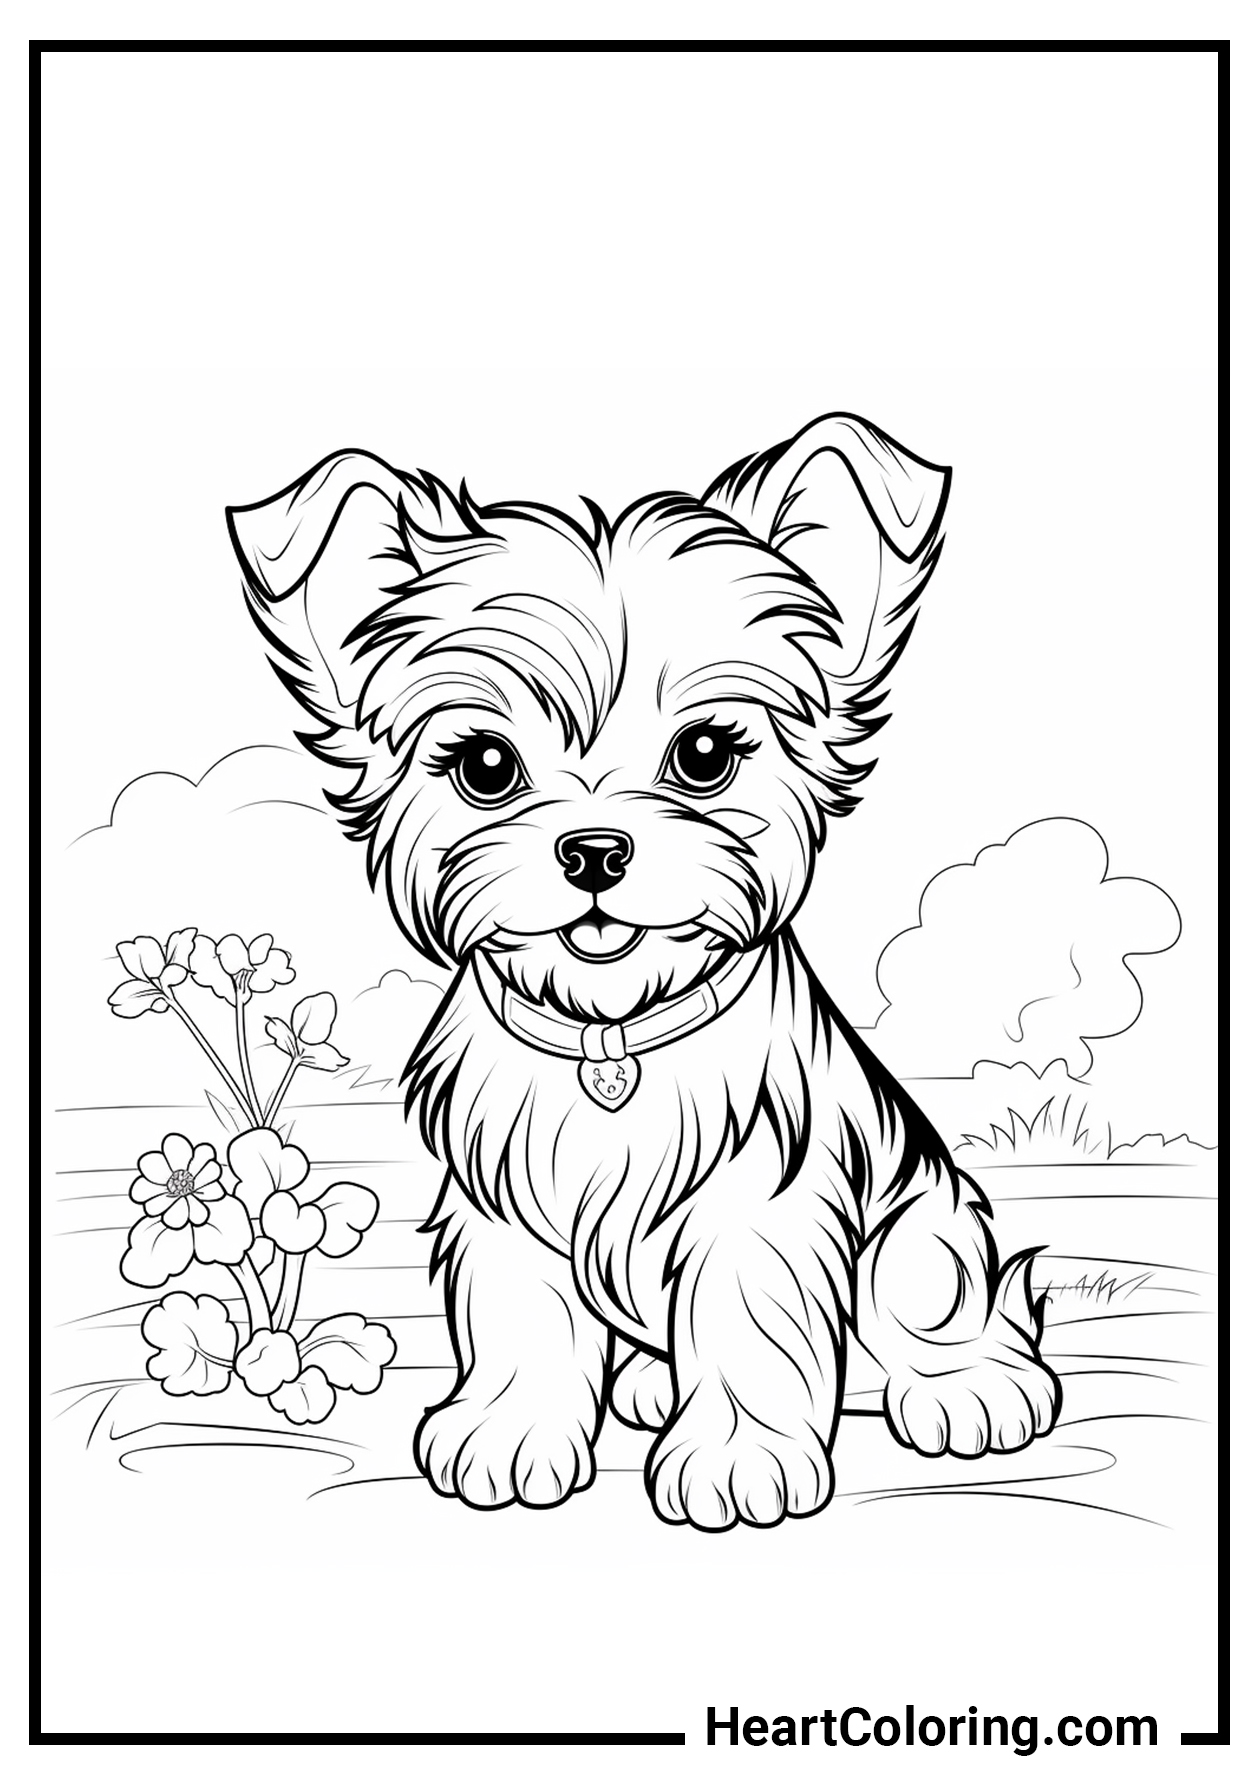 Dogs and puppies coloring pages for children free pdf